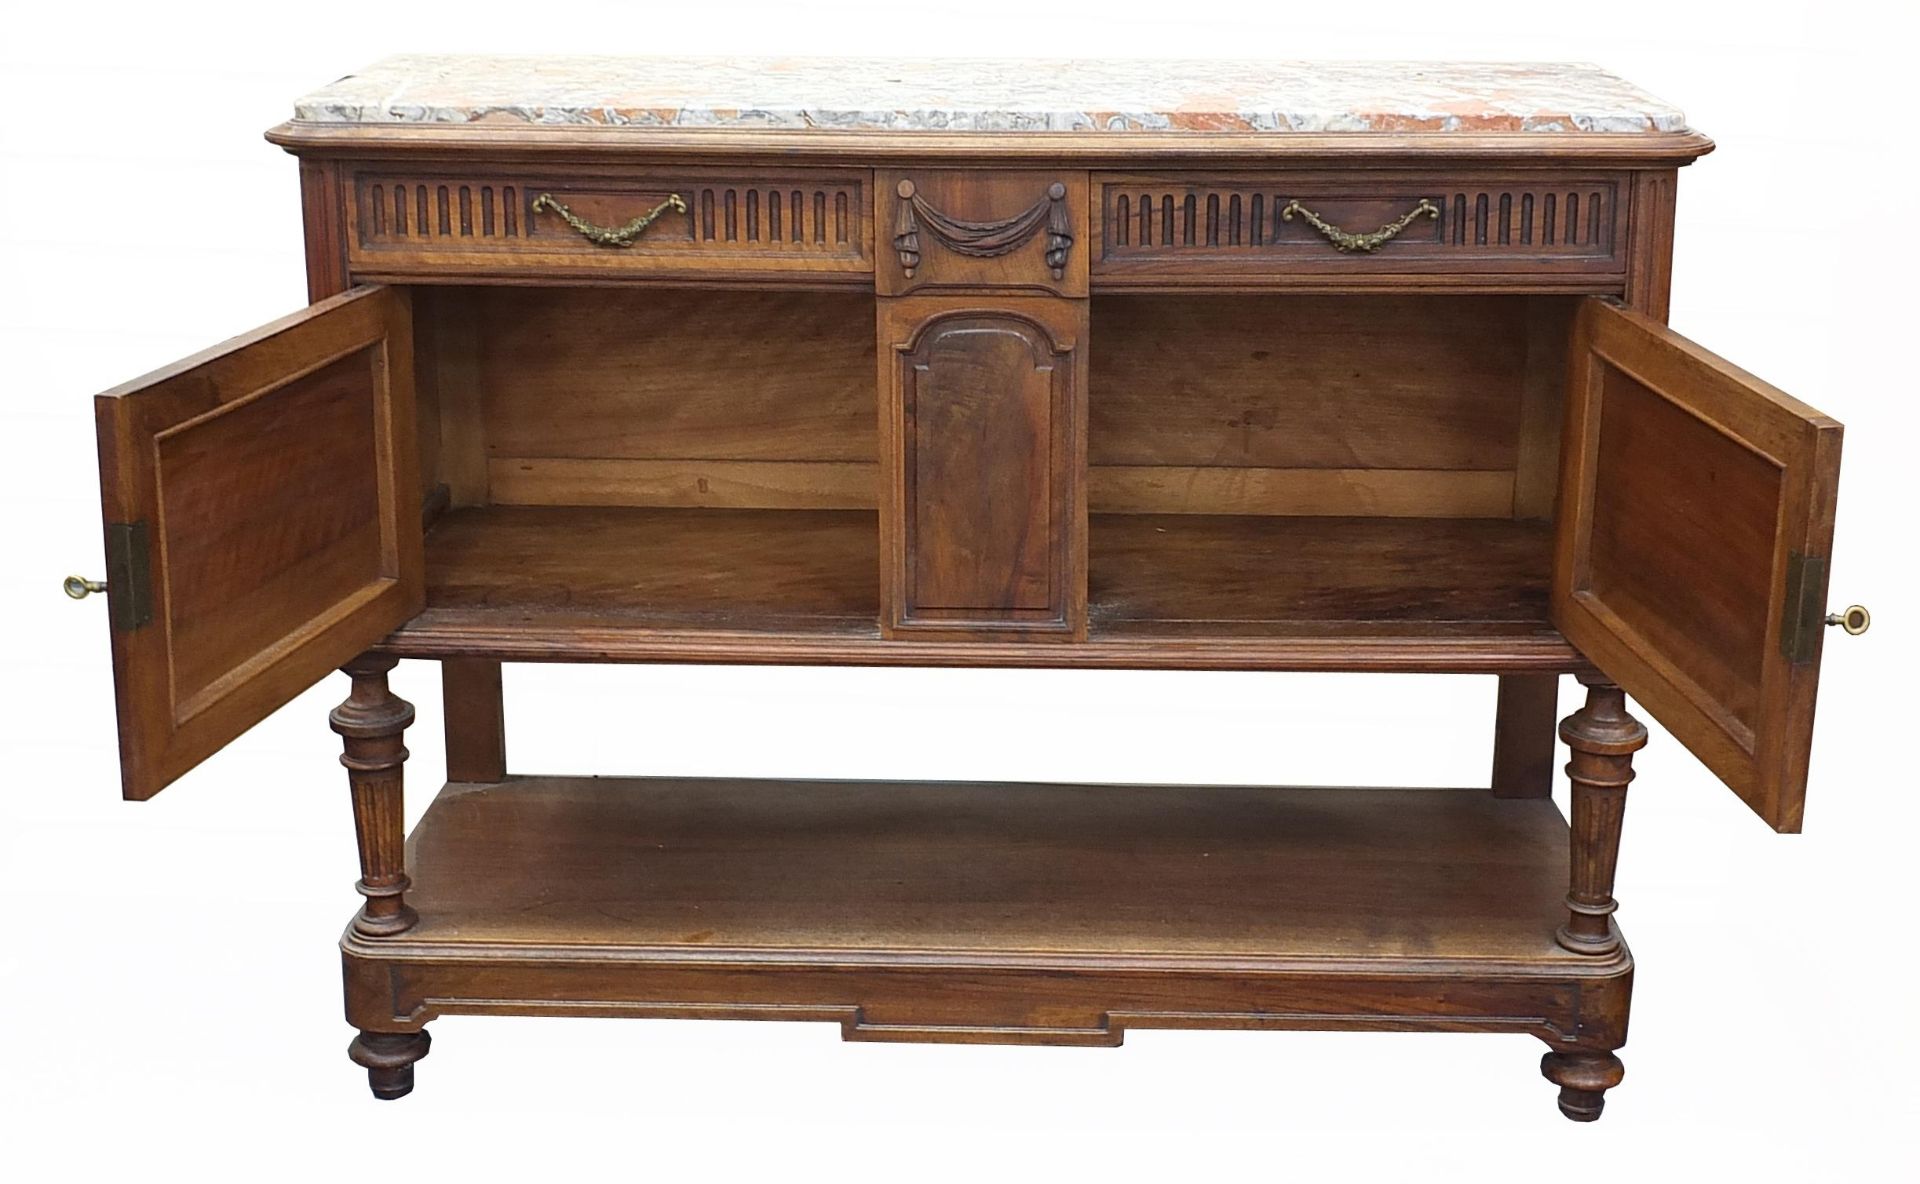 French walnut sideboard with marble top, 120cm H x 134cm W x 47cm D - Image 2 of 3